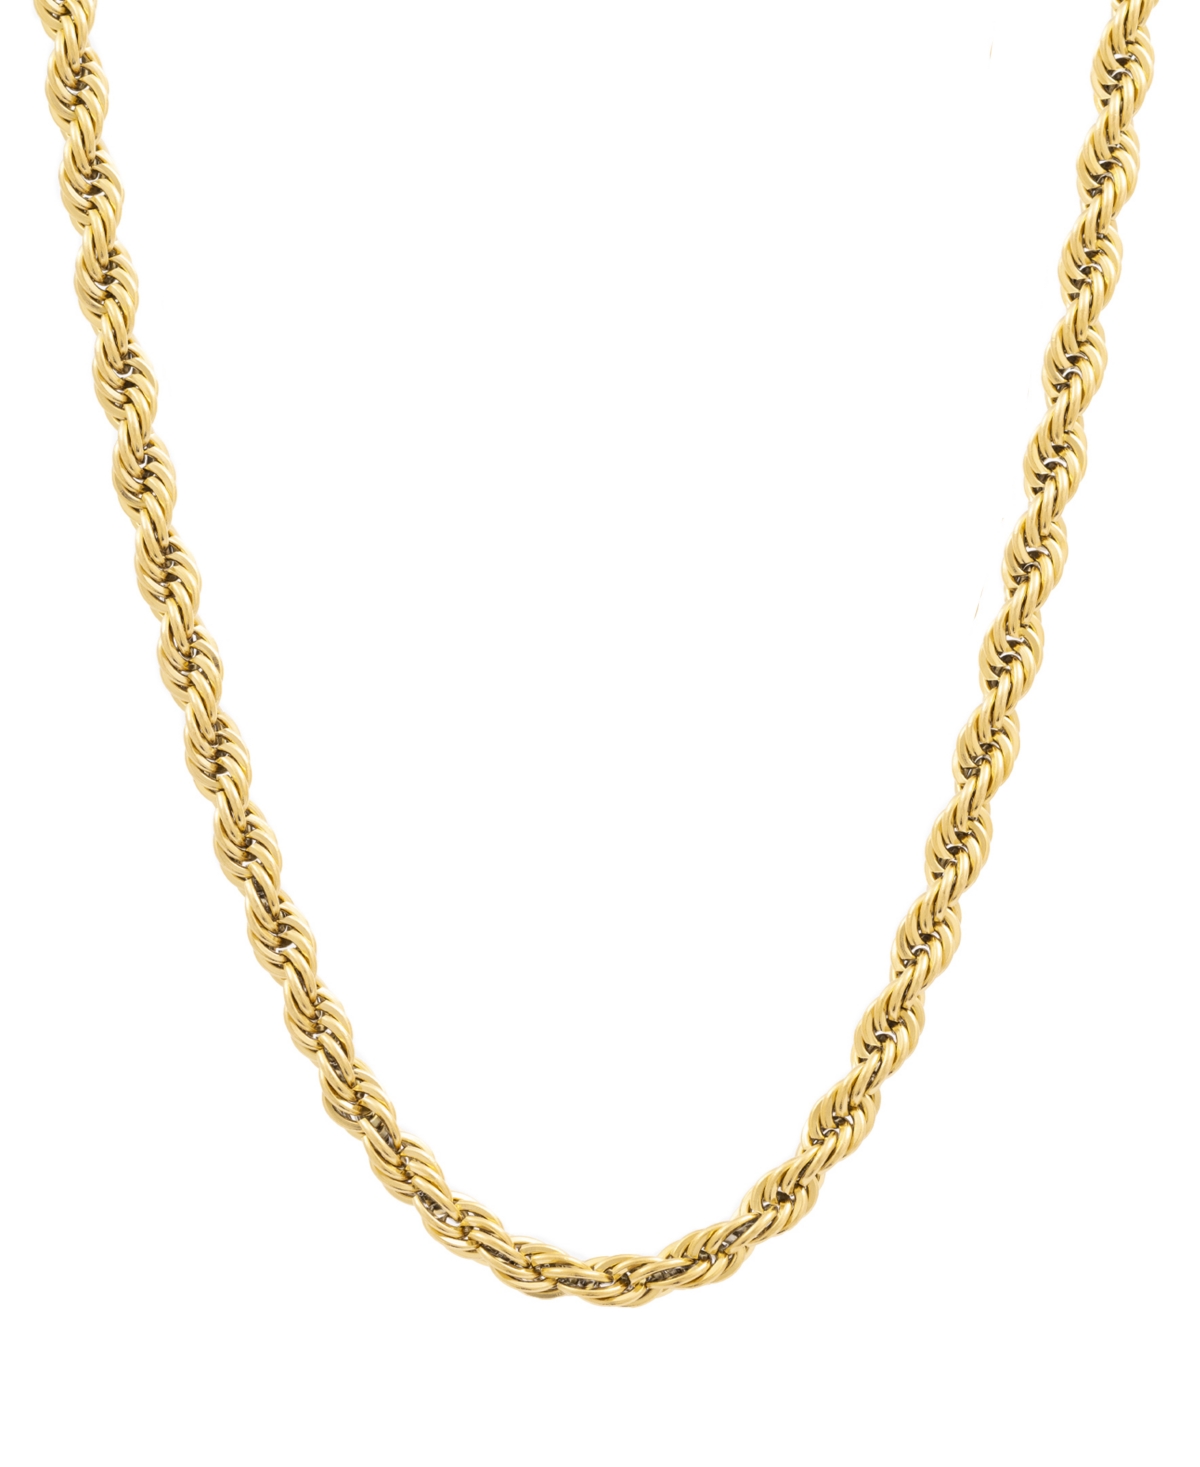 Smith Men's Rope Link 24" Chain Necklace in Gold-Tone Ion-Plated Stainless Steel - Gold-Tone